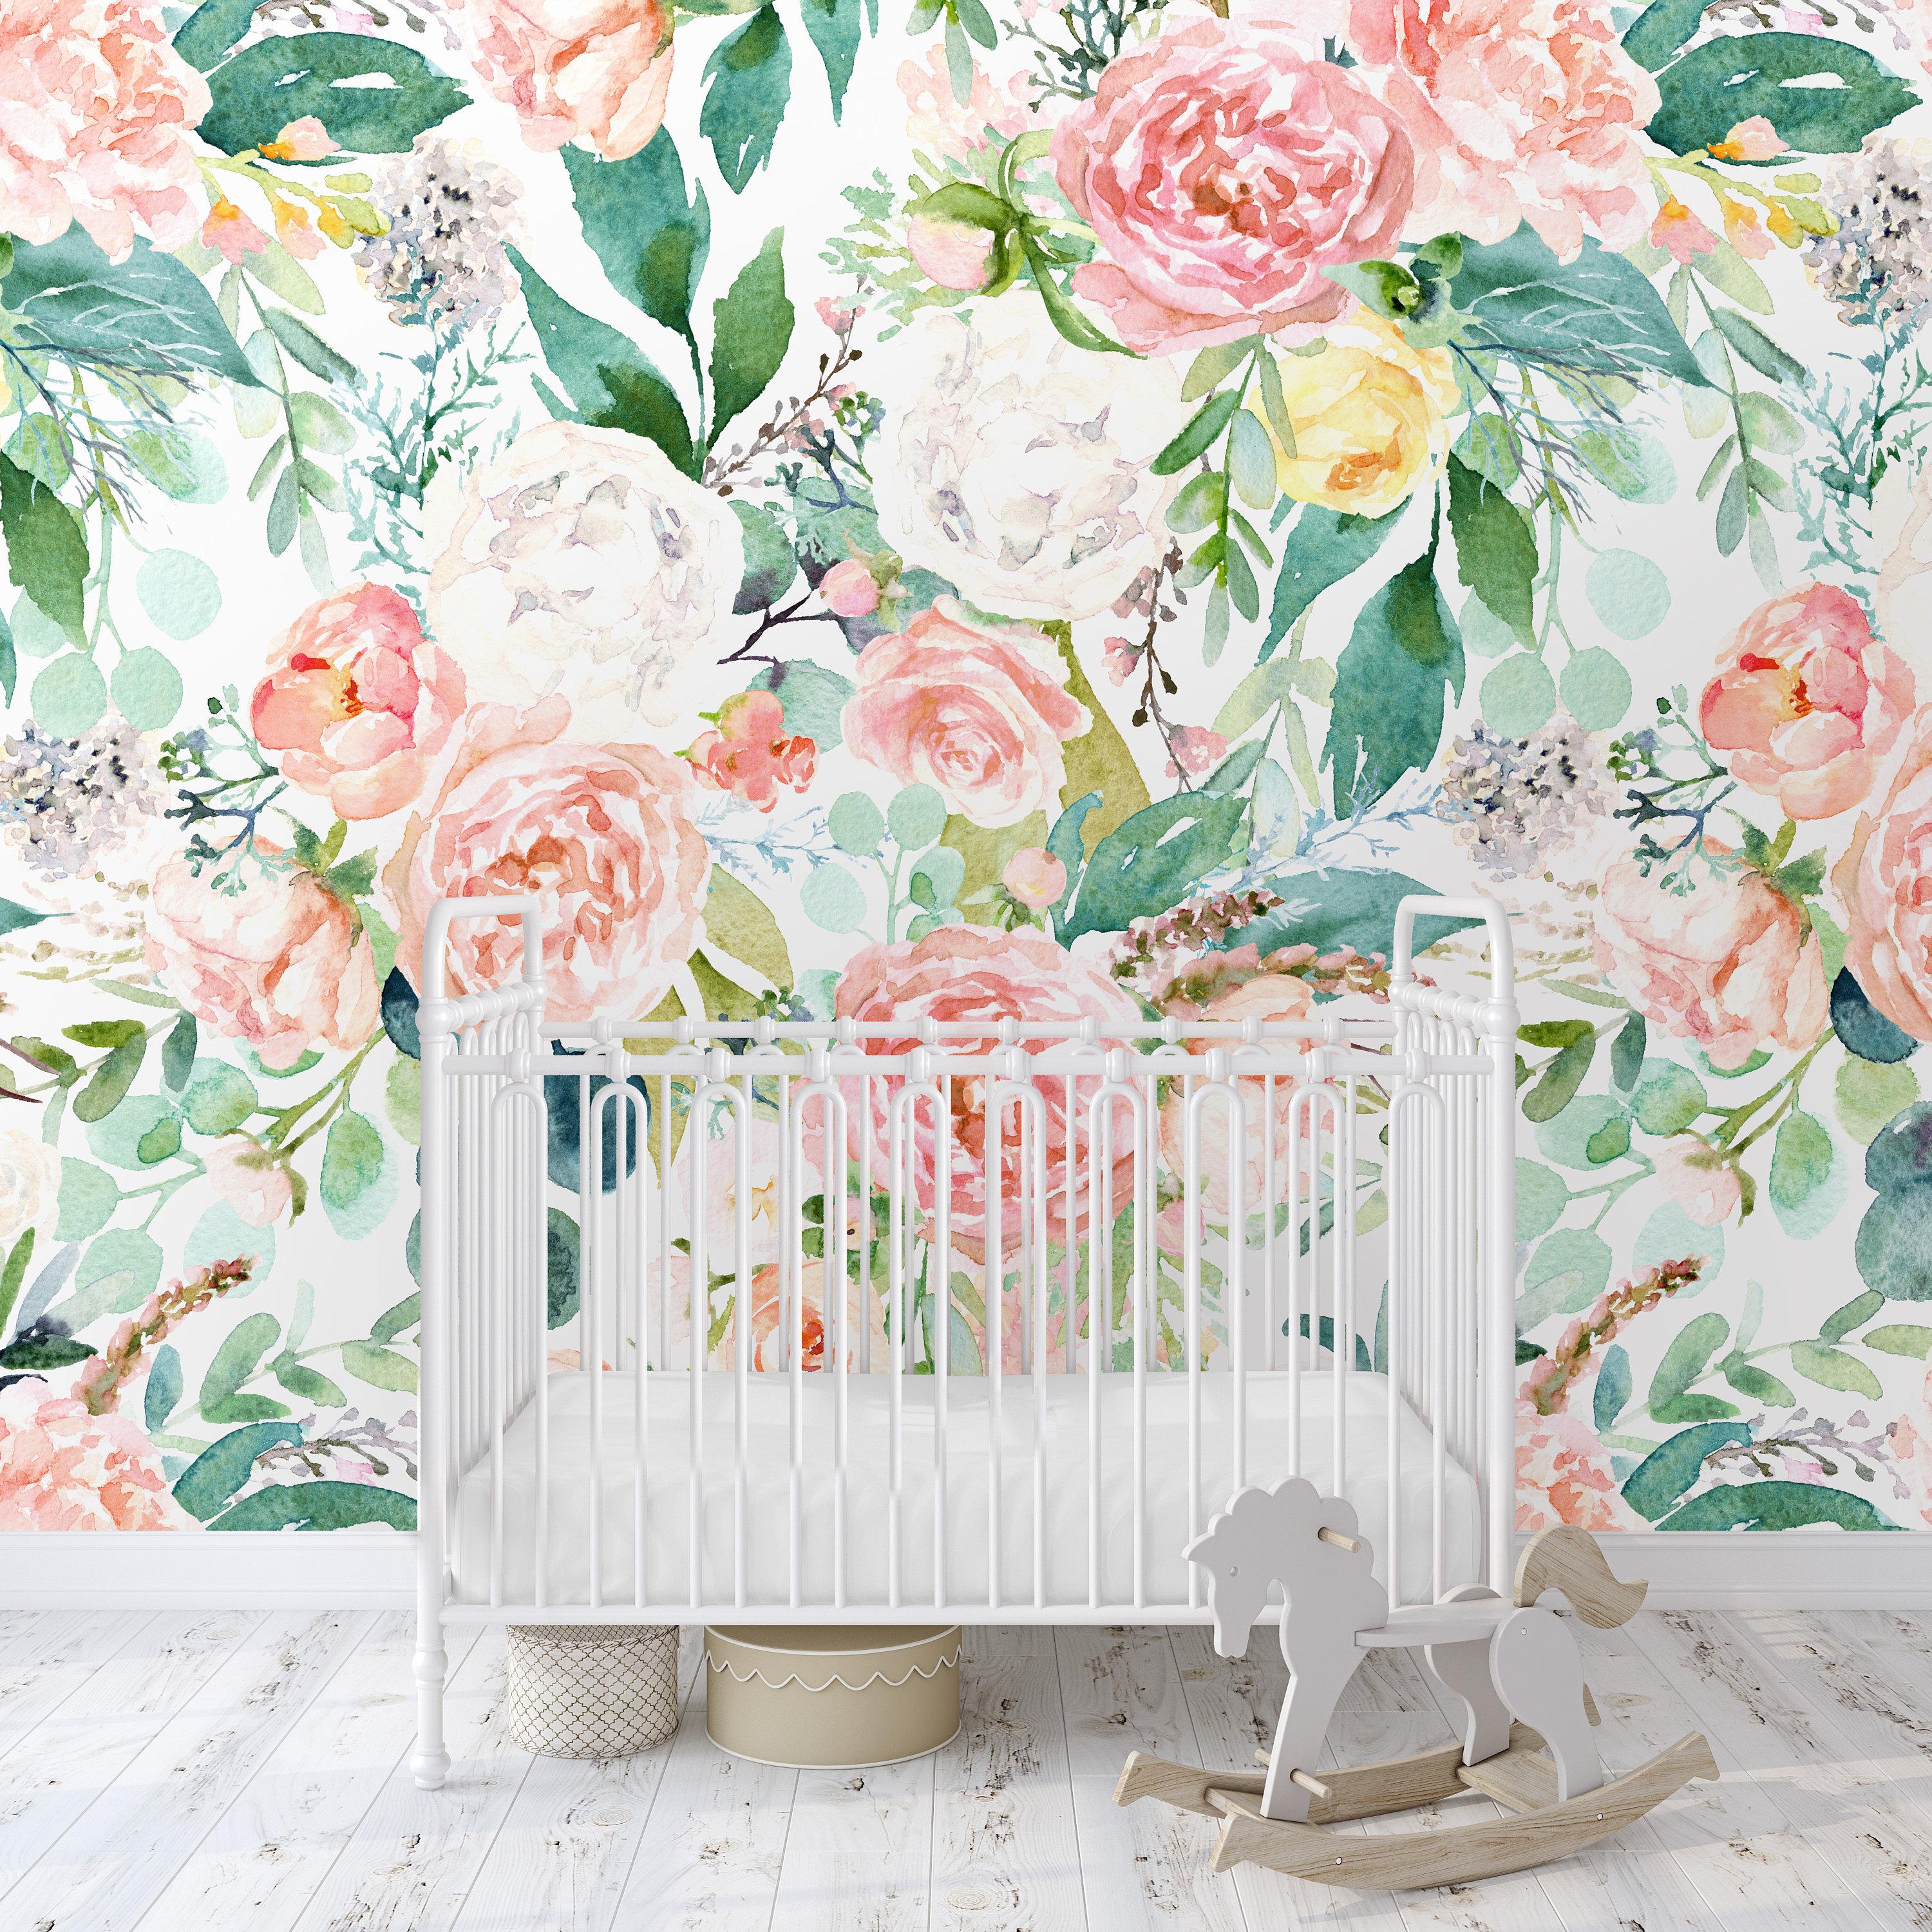 Bright Pastel Floral Wallpaper Peel and Stick Removable